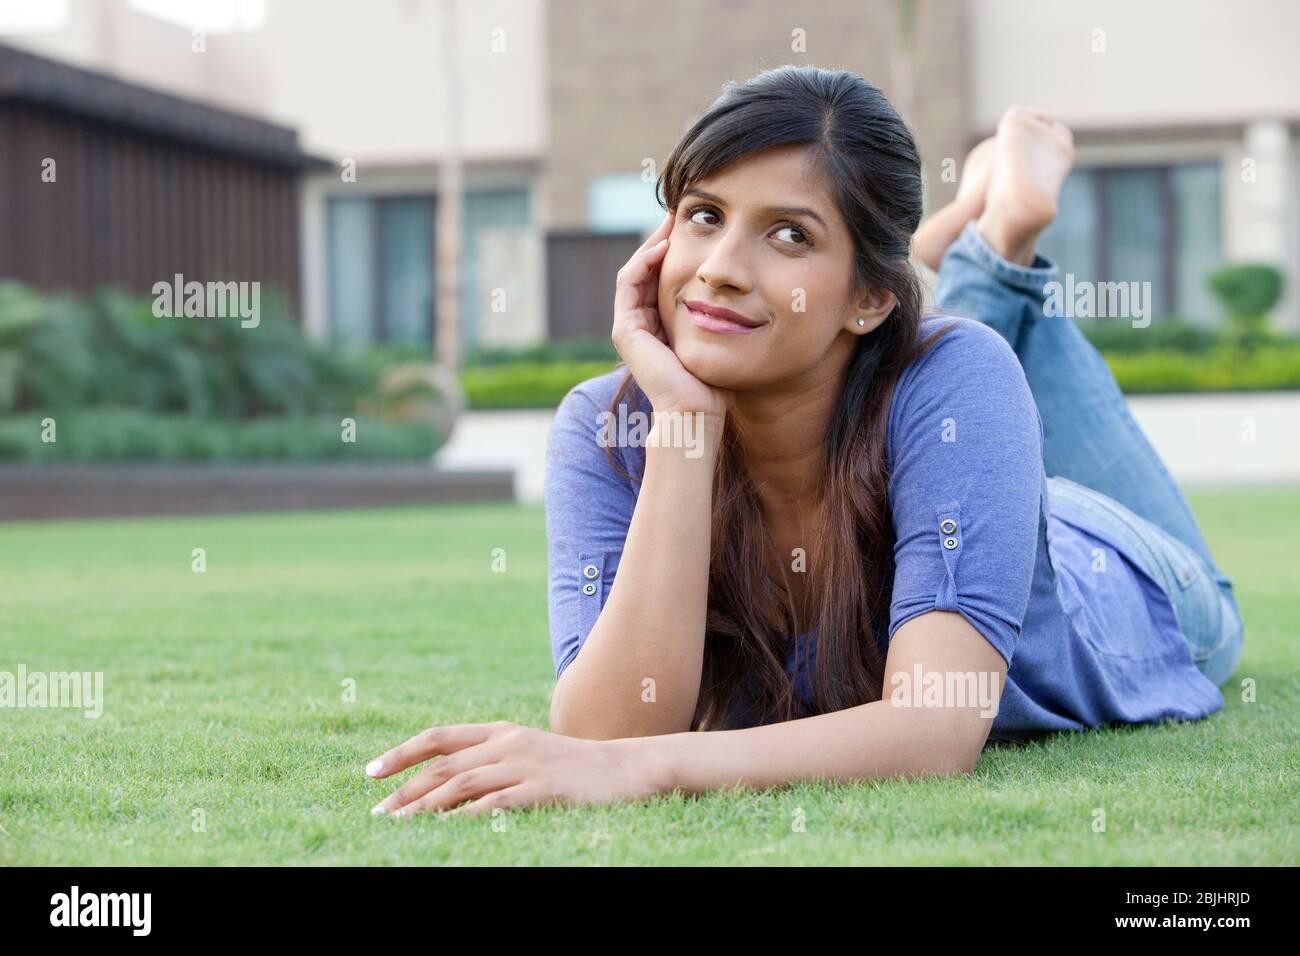 Woman lying on a lawn thinking Stock Photo